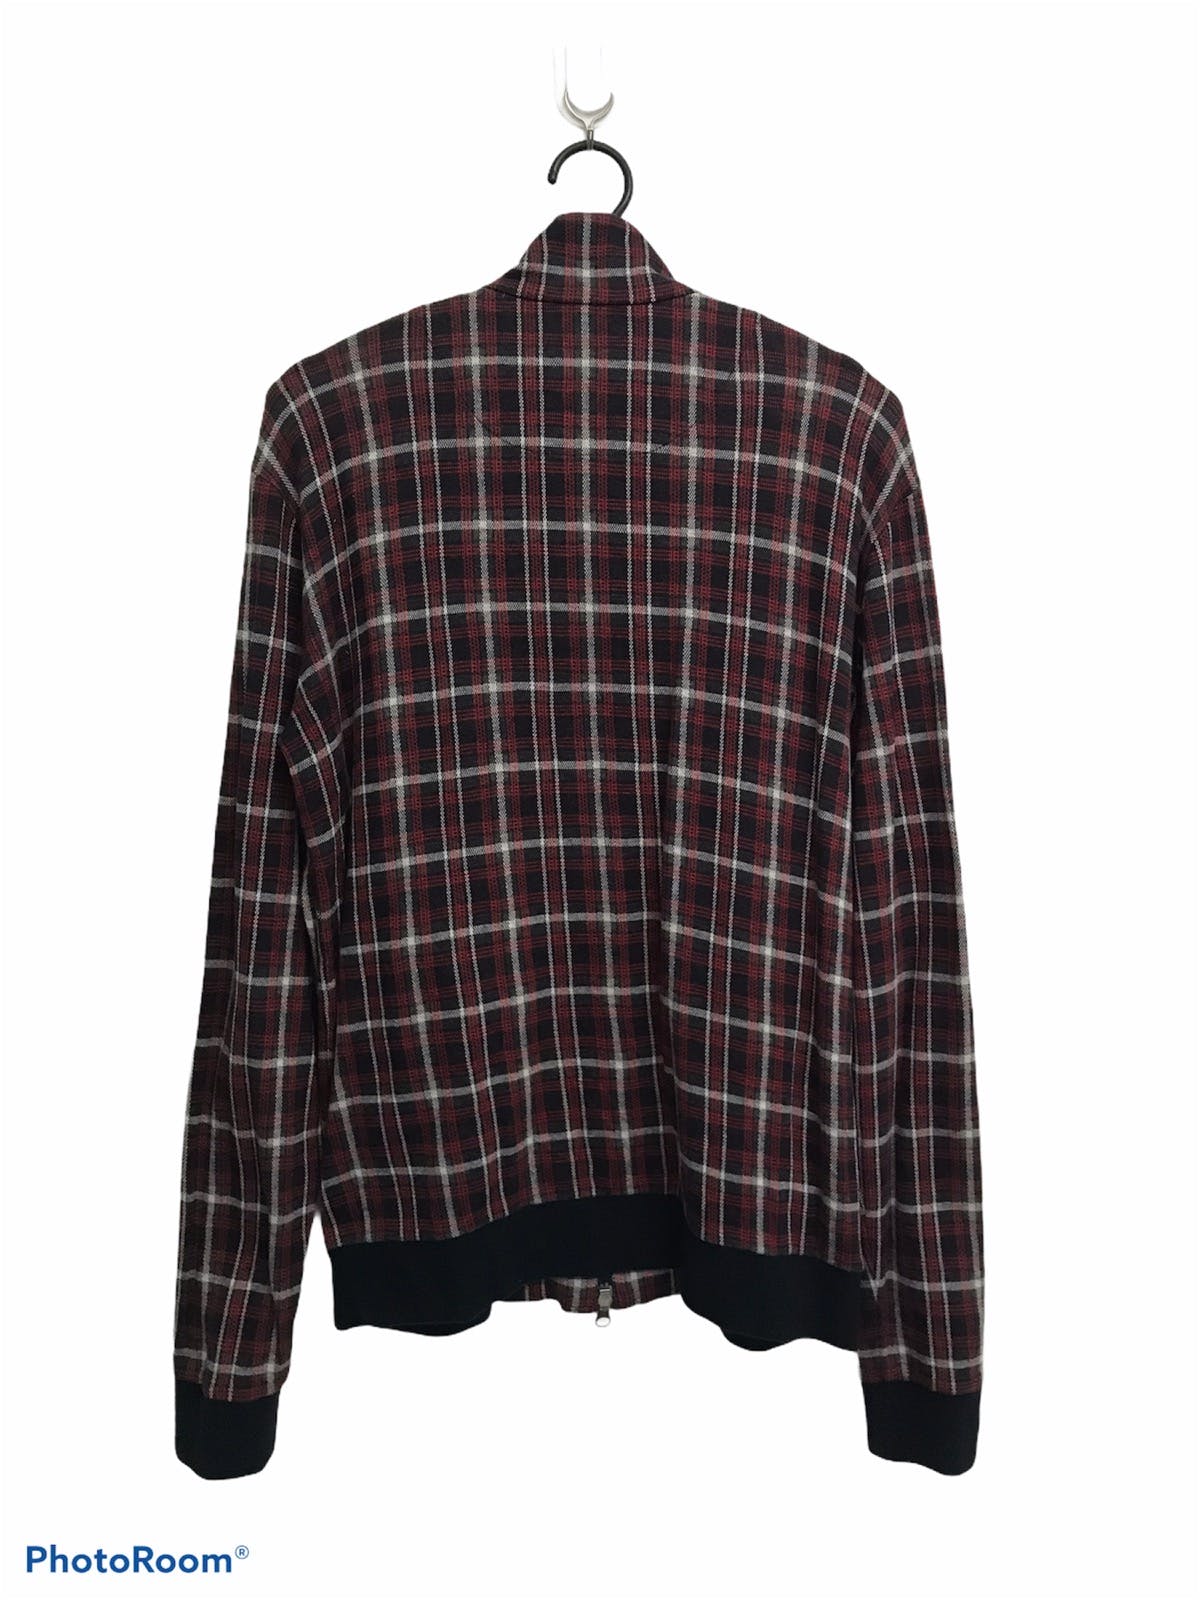 Fred Perry Checkered Thin Jacket Made in Japan - 2